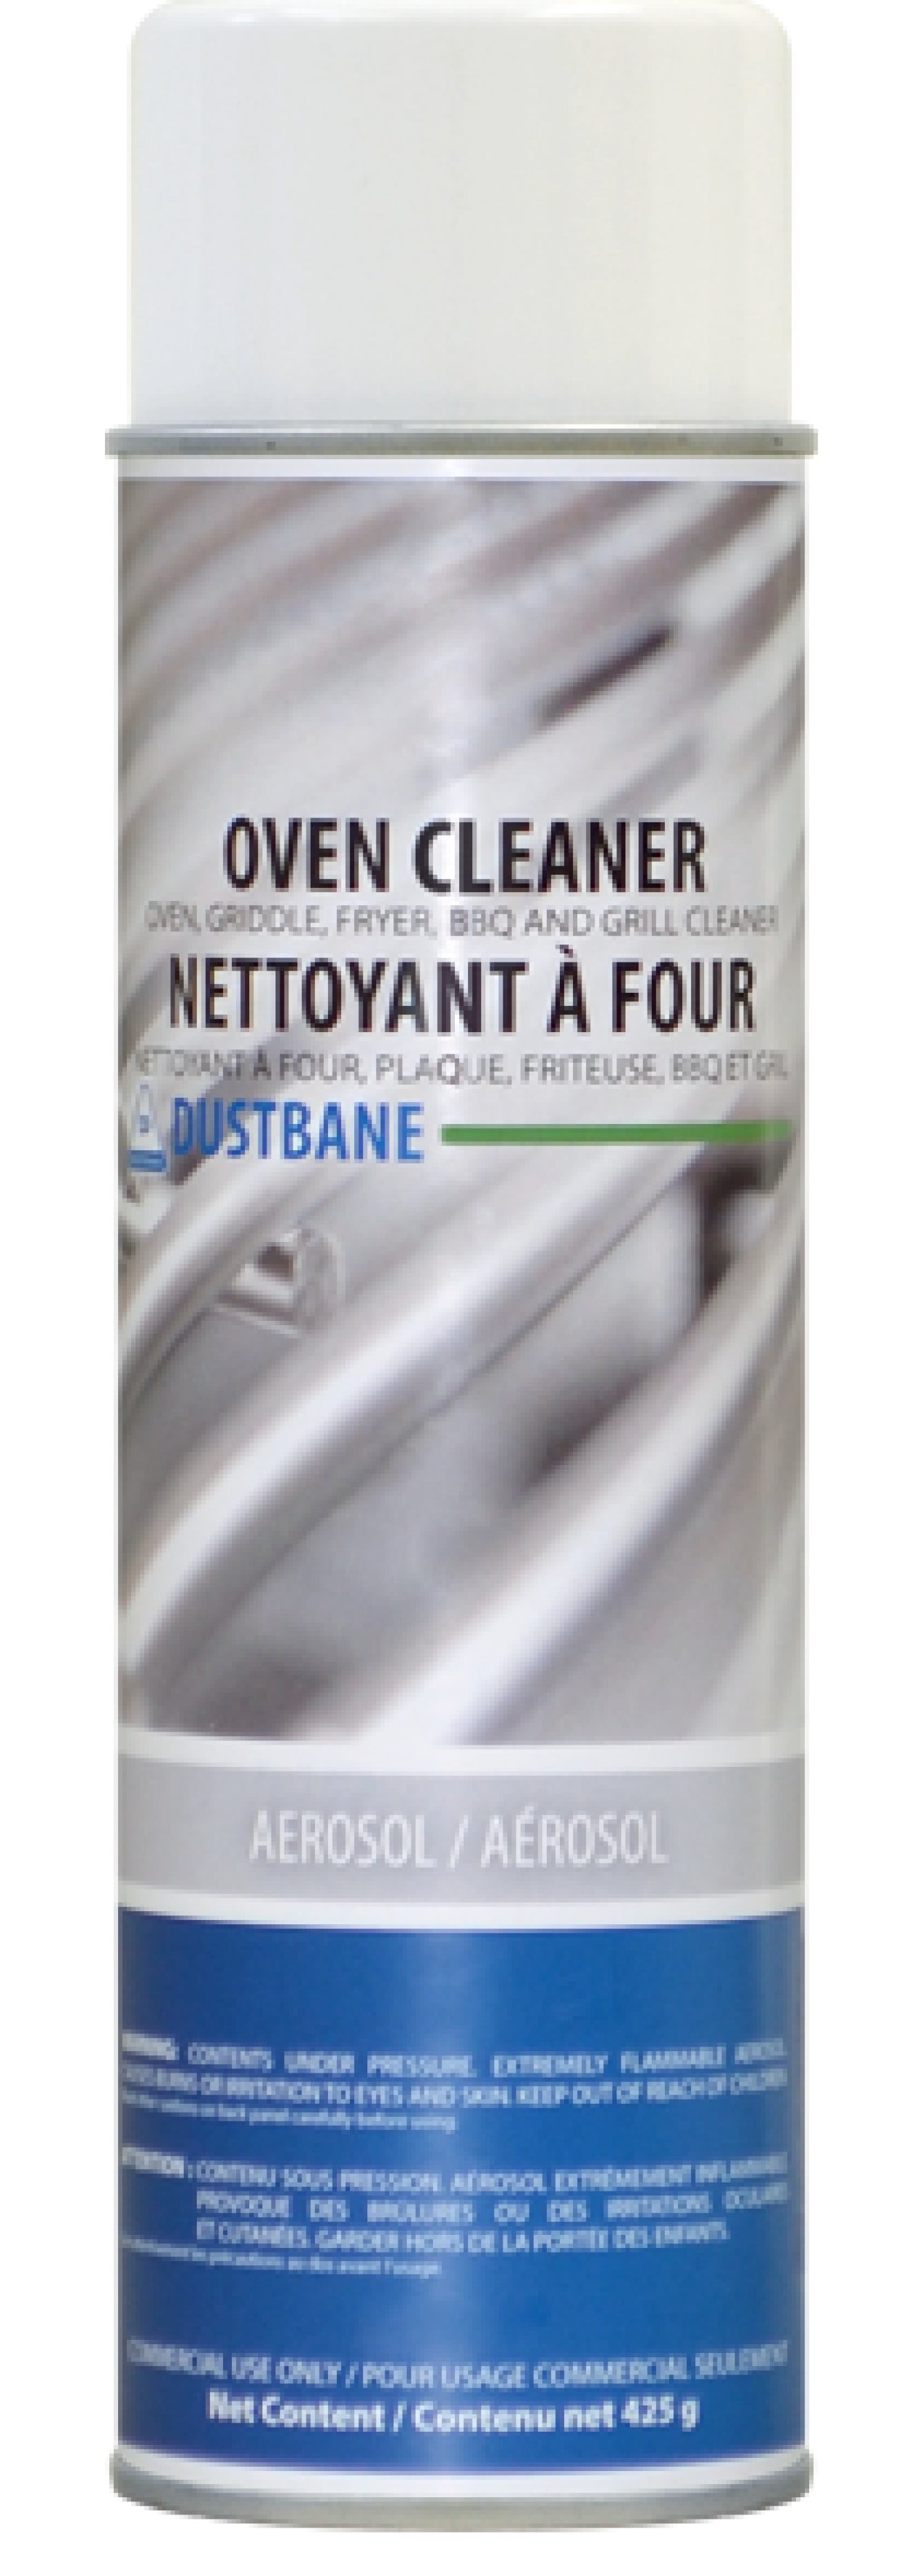 510G DUSTBANE® OVEN CLEANER, AEROSOL CAN